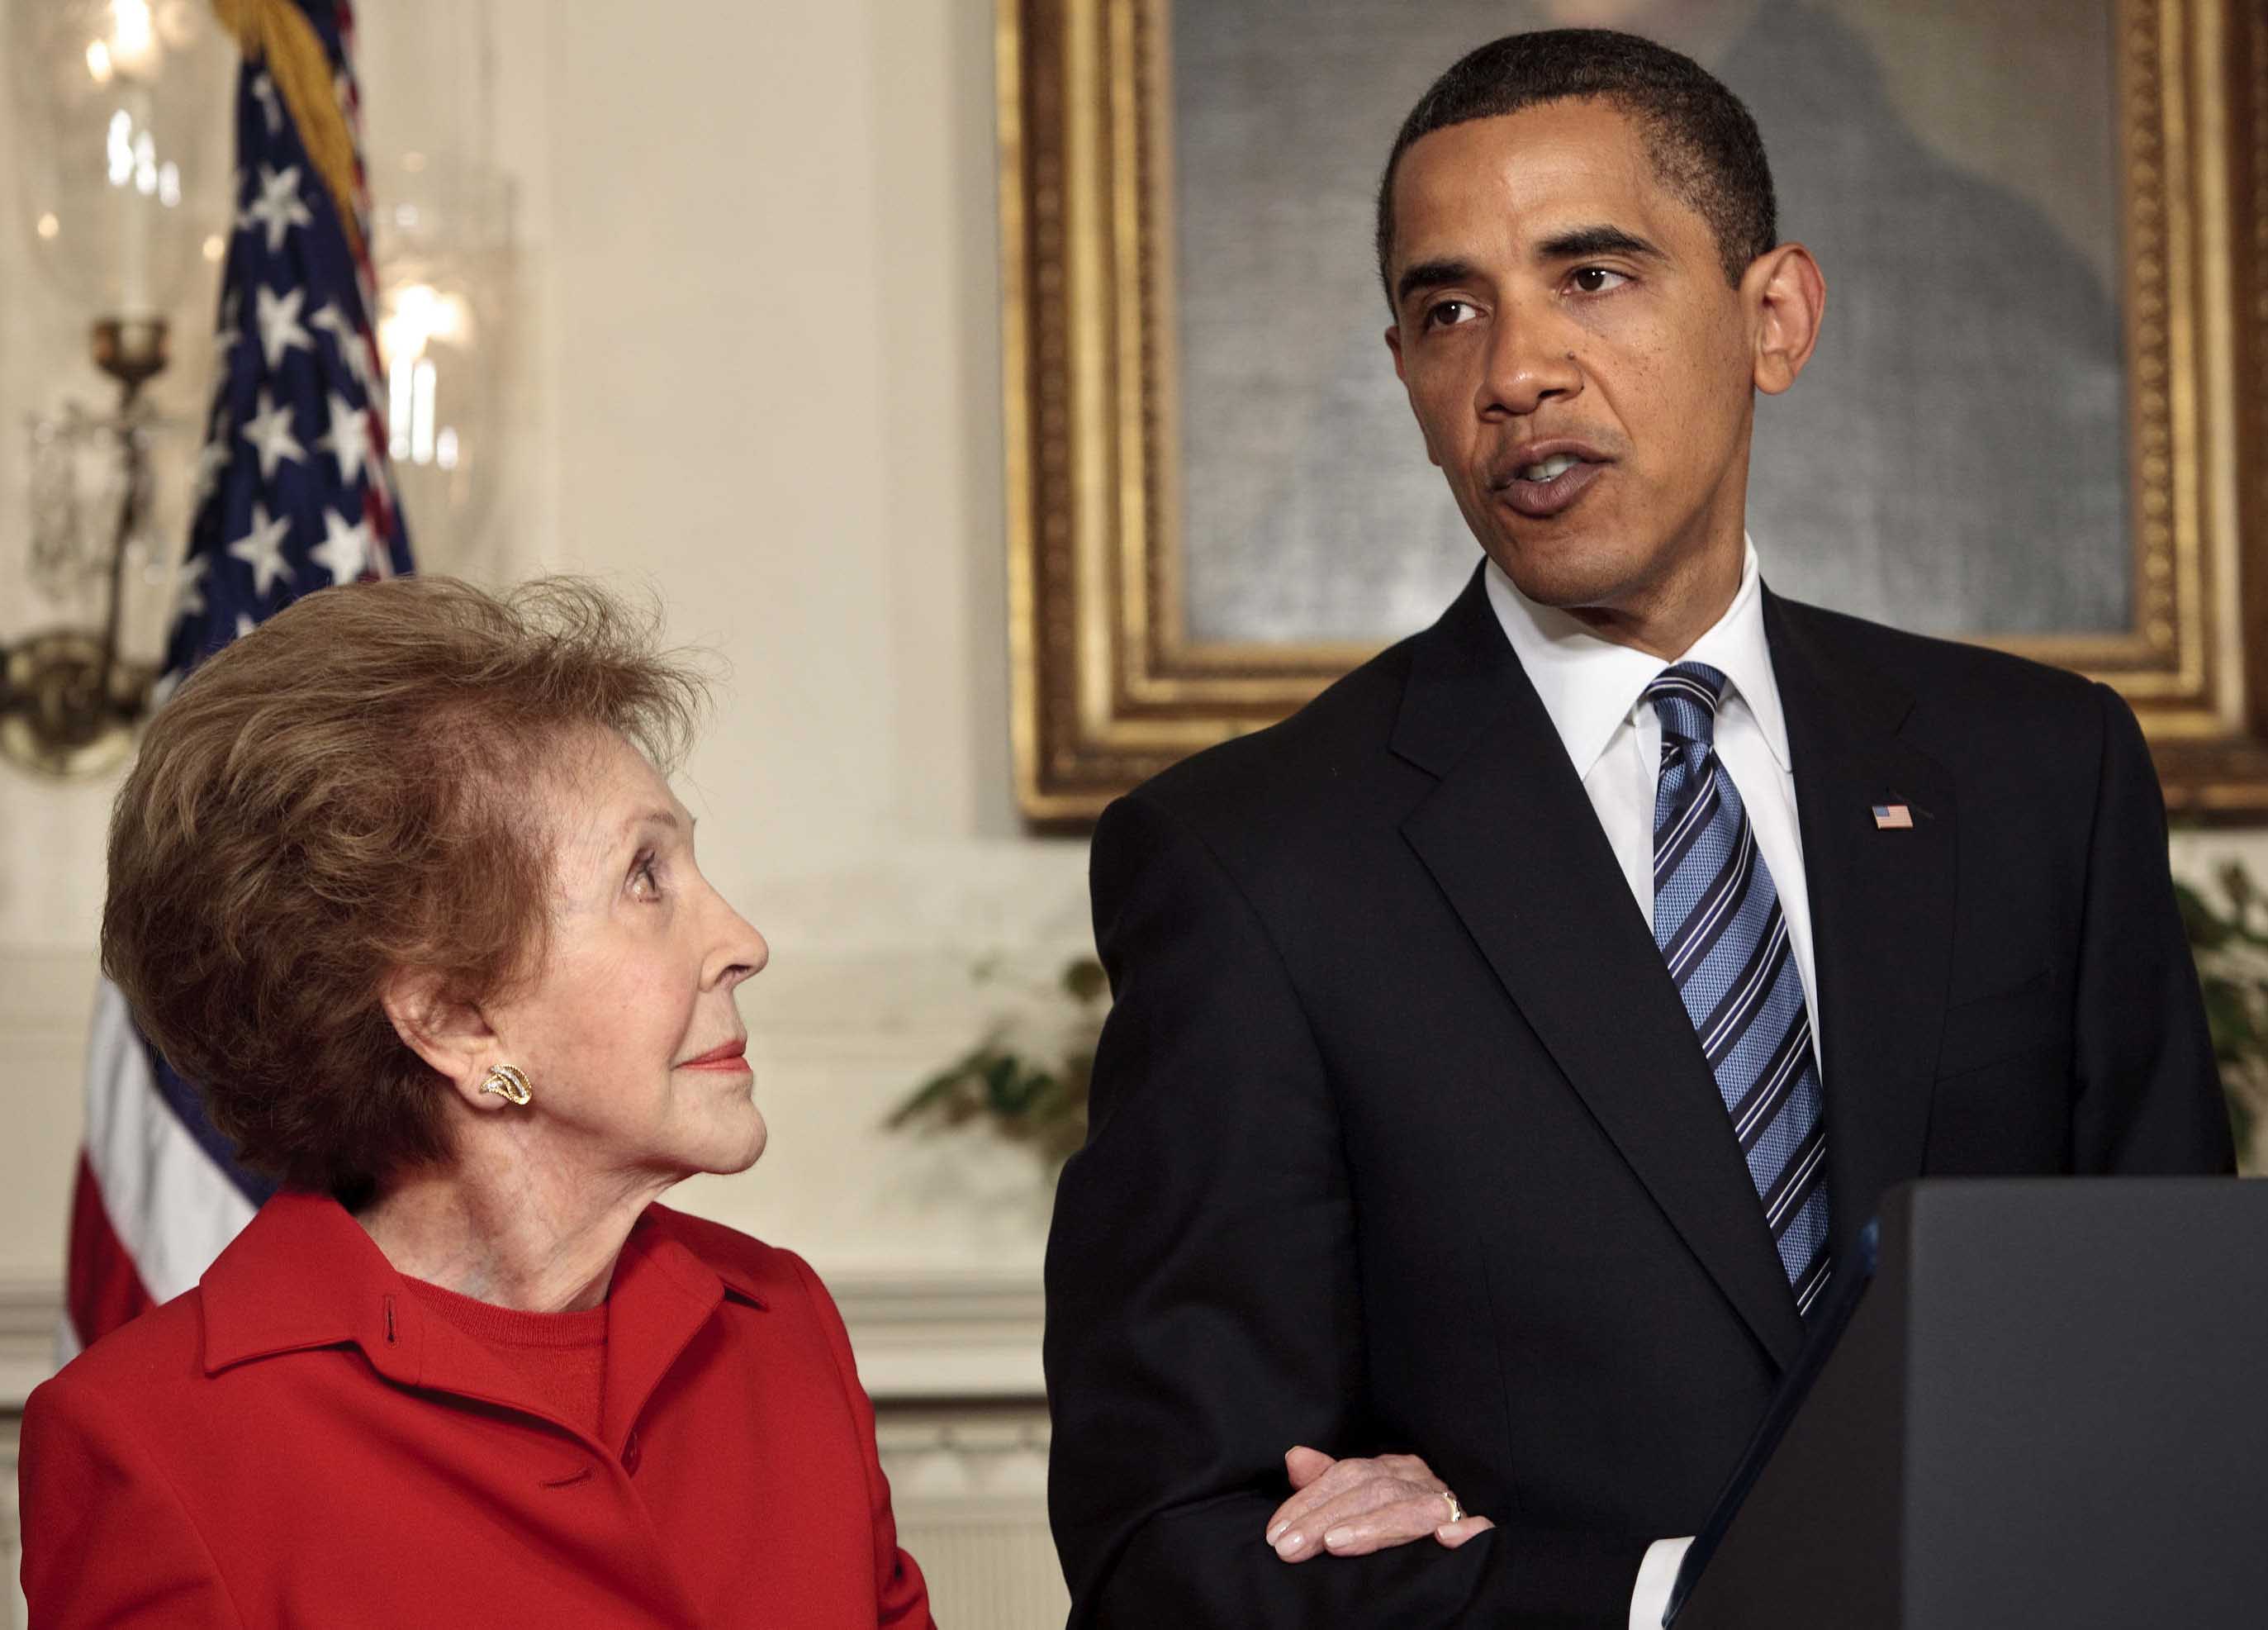 WASHINGTON - JUNE 2: Former first lady Nancy Reagan listens to President Barack Obama speak during a bill signing in the Diplomatic Reception Room of the White House June 2, 2009 in Washington, DC. President Barack Obama signed the 